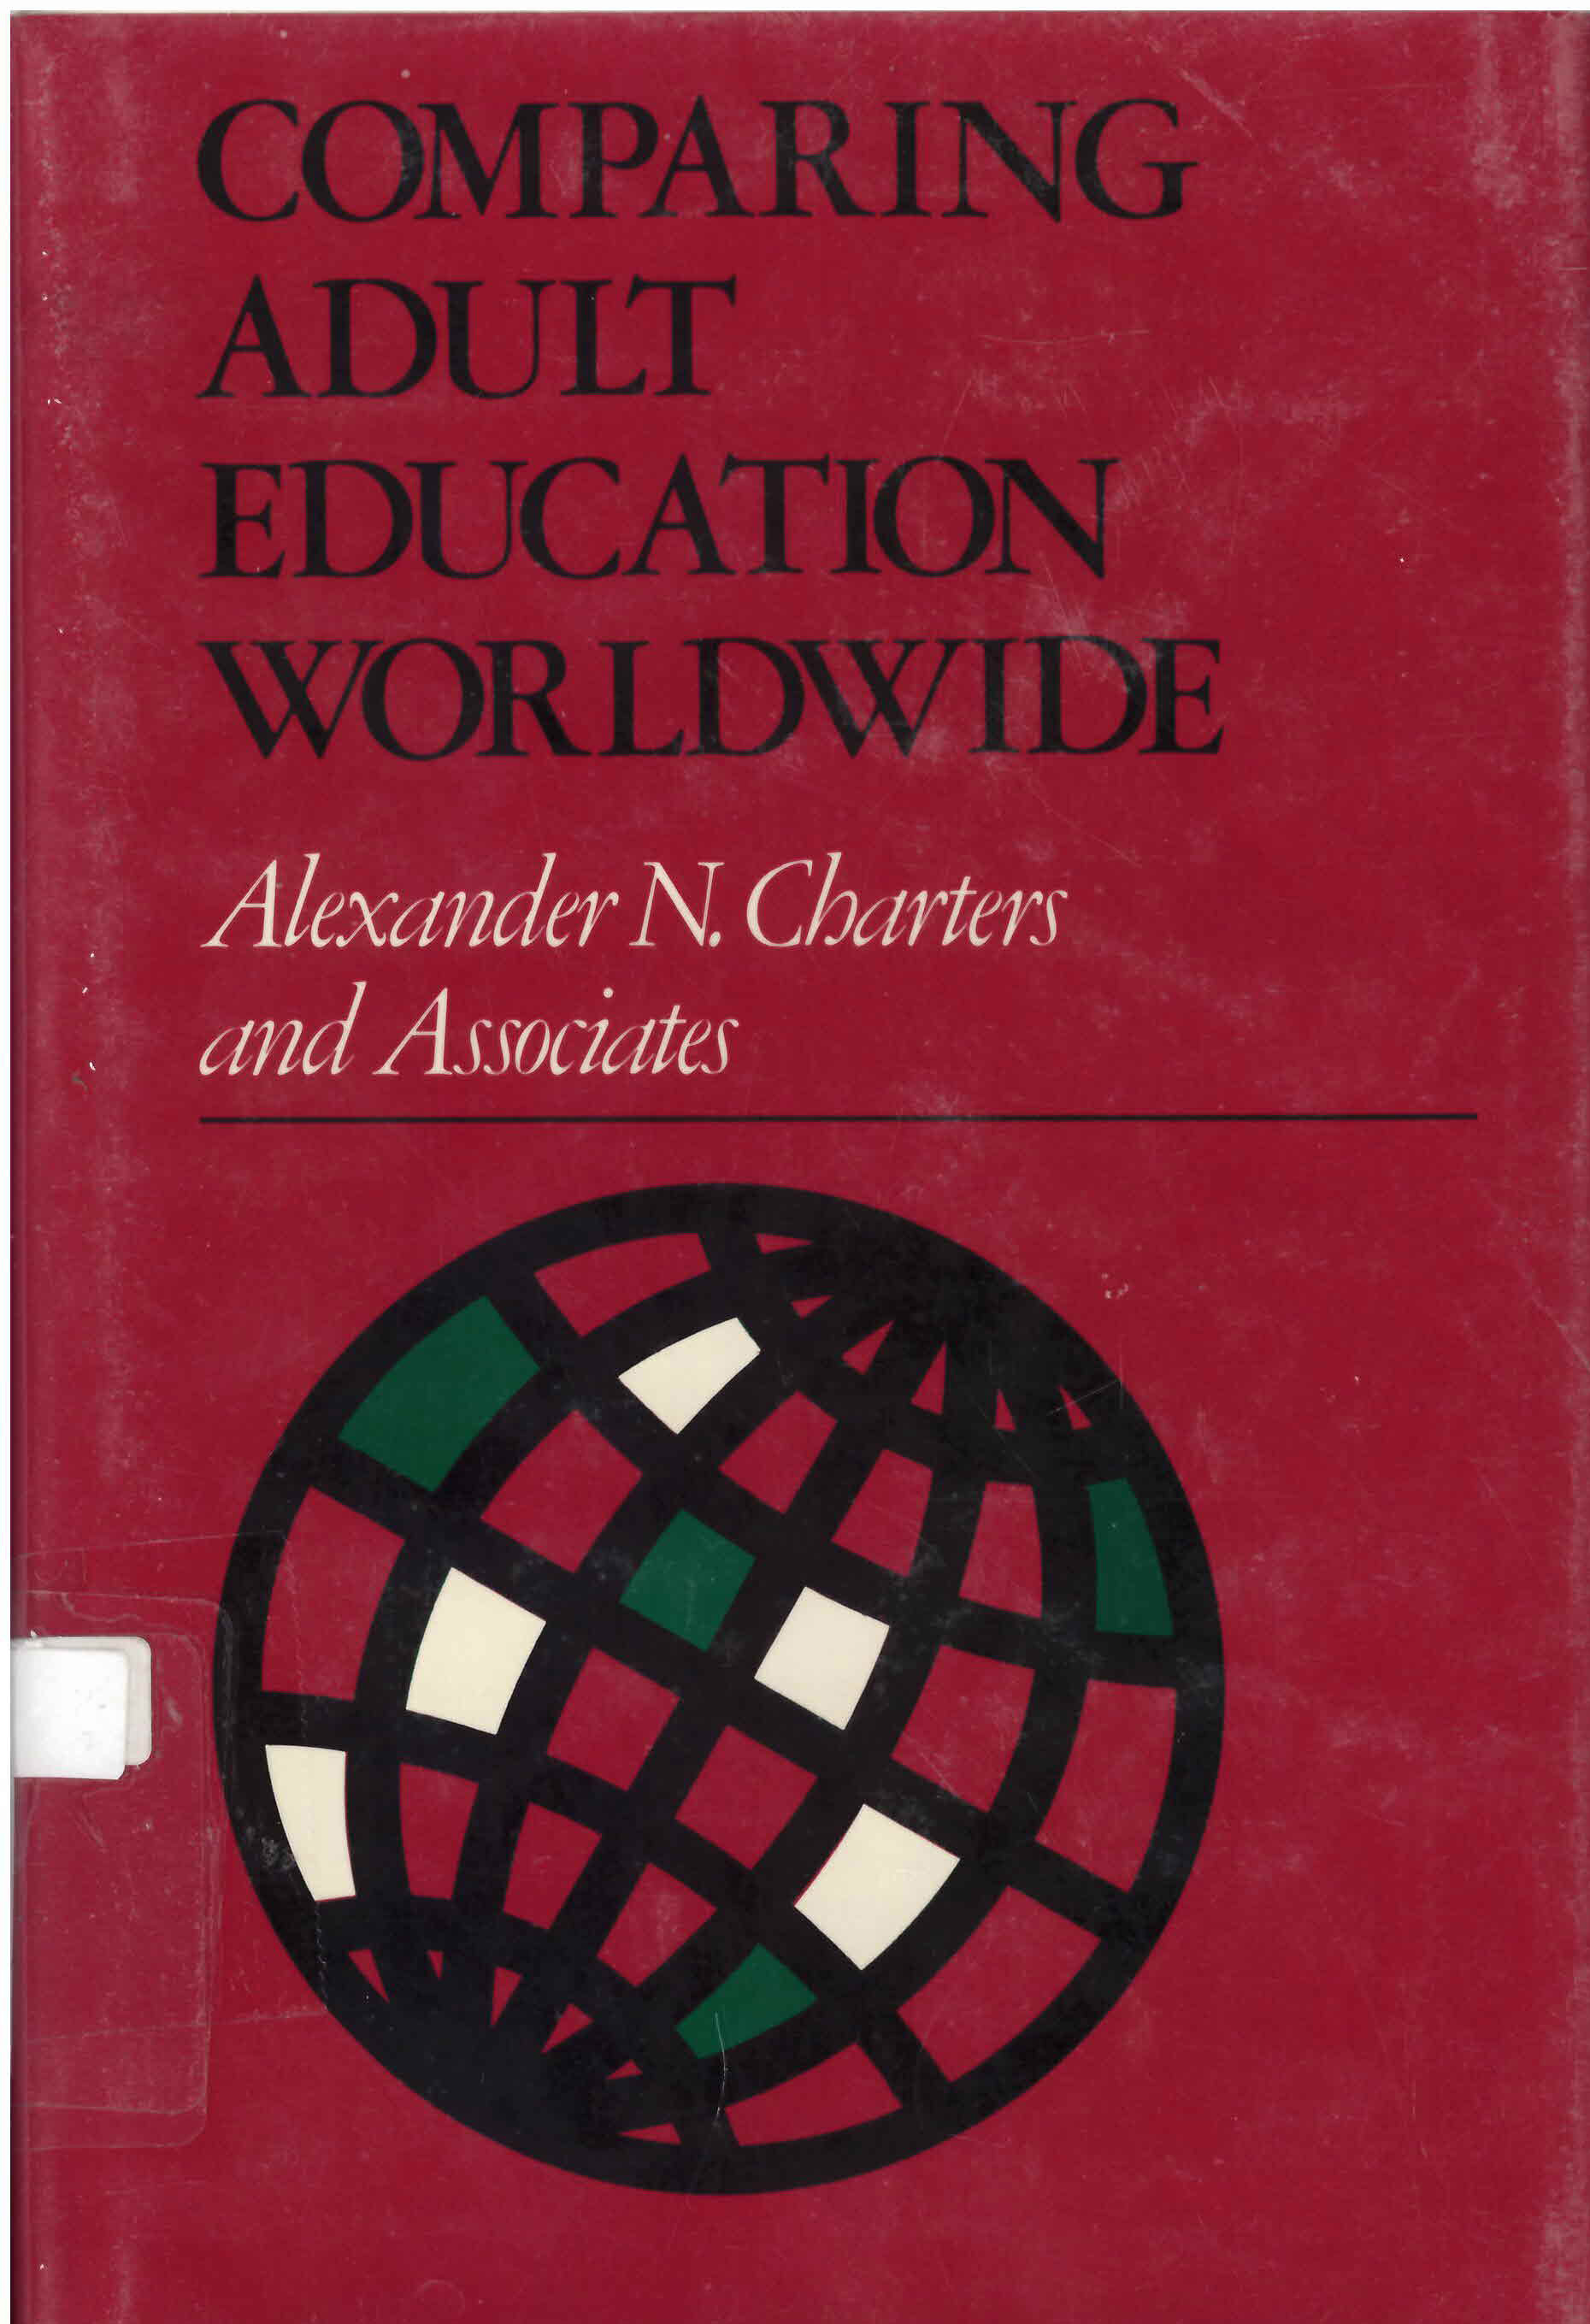 Comparing adult education worldwide